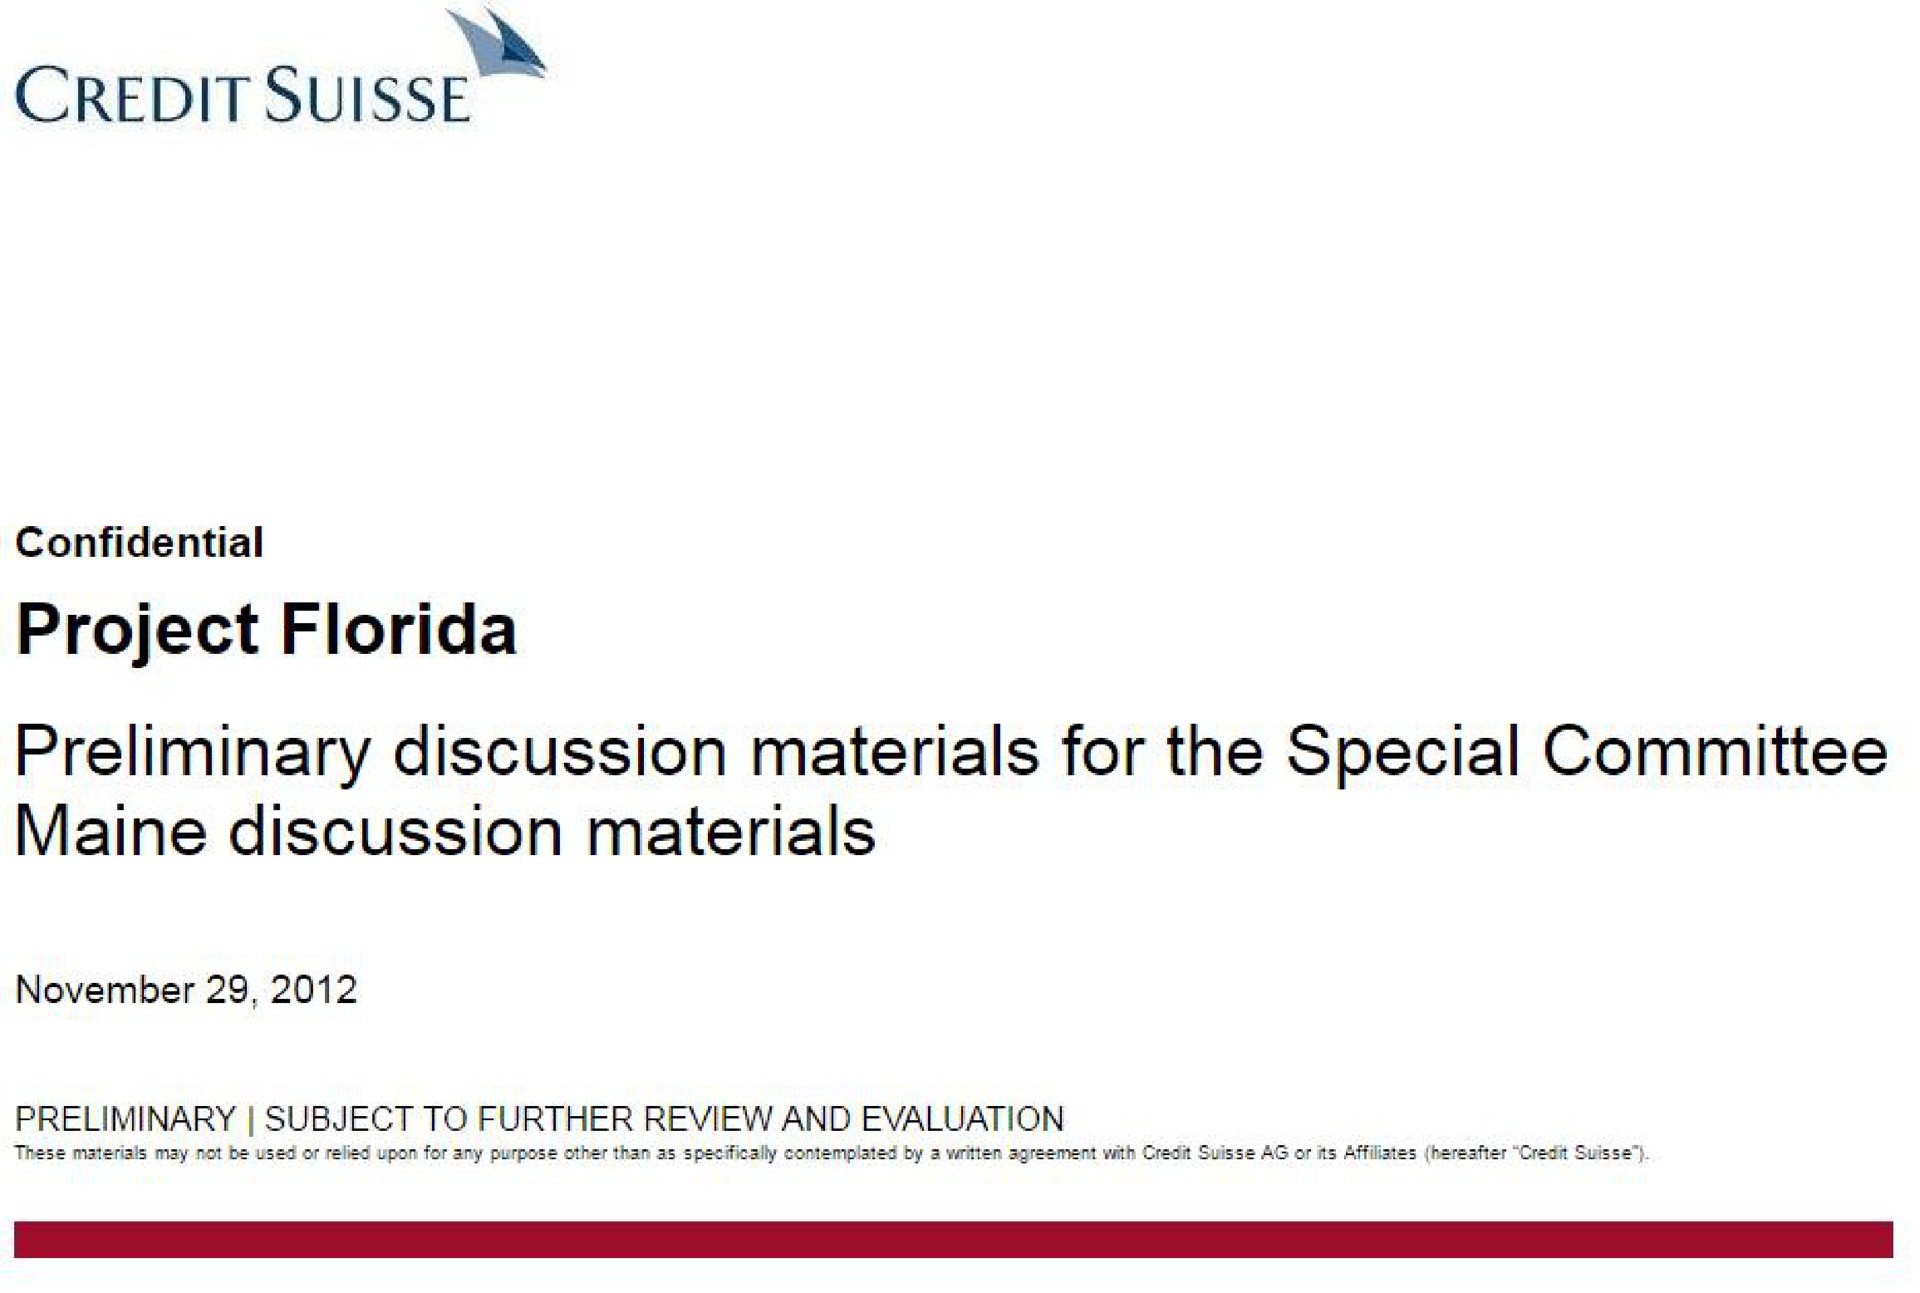 credit project preliminary discussion materials for the special committee discussion materials | Credit Suisse